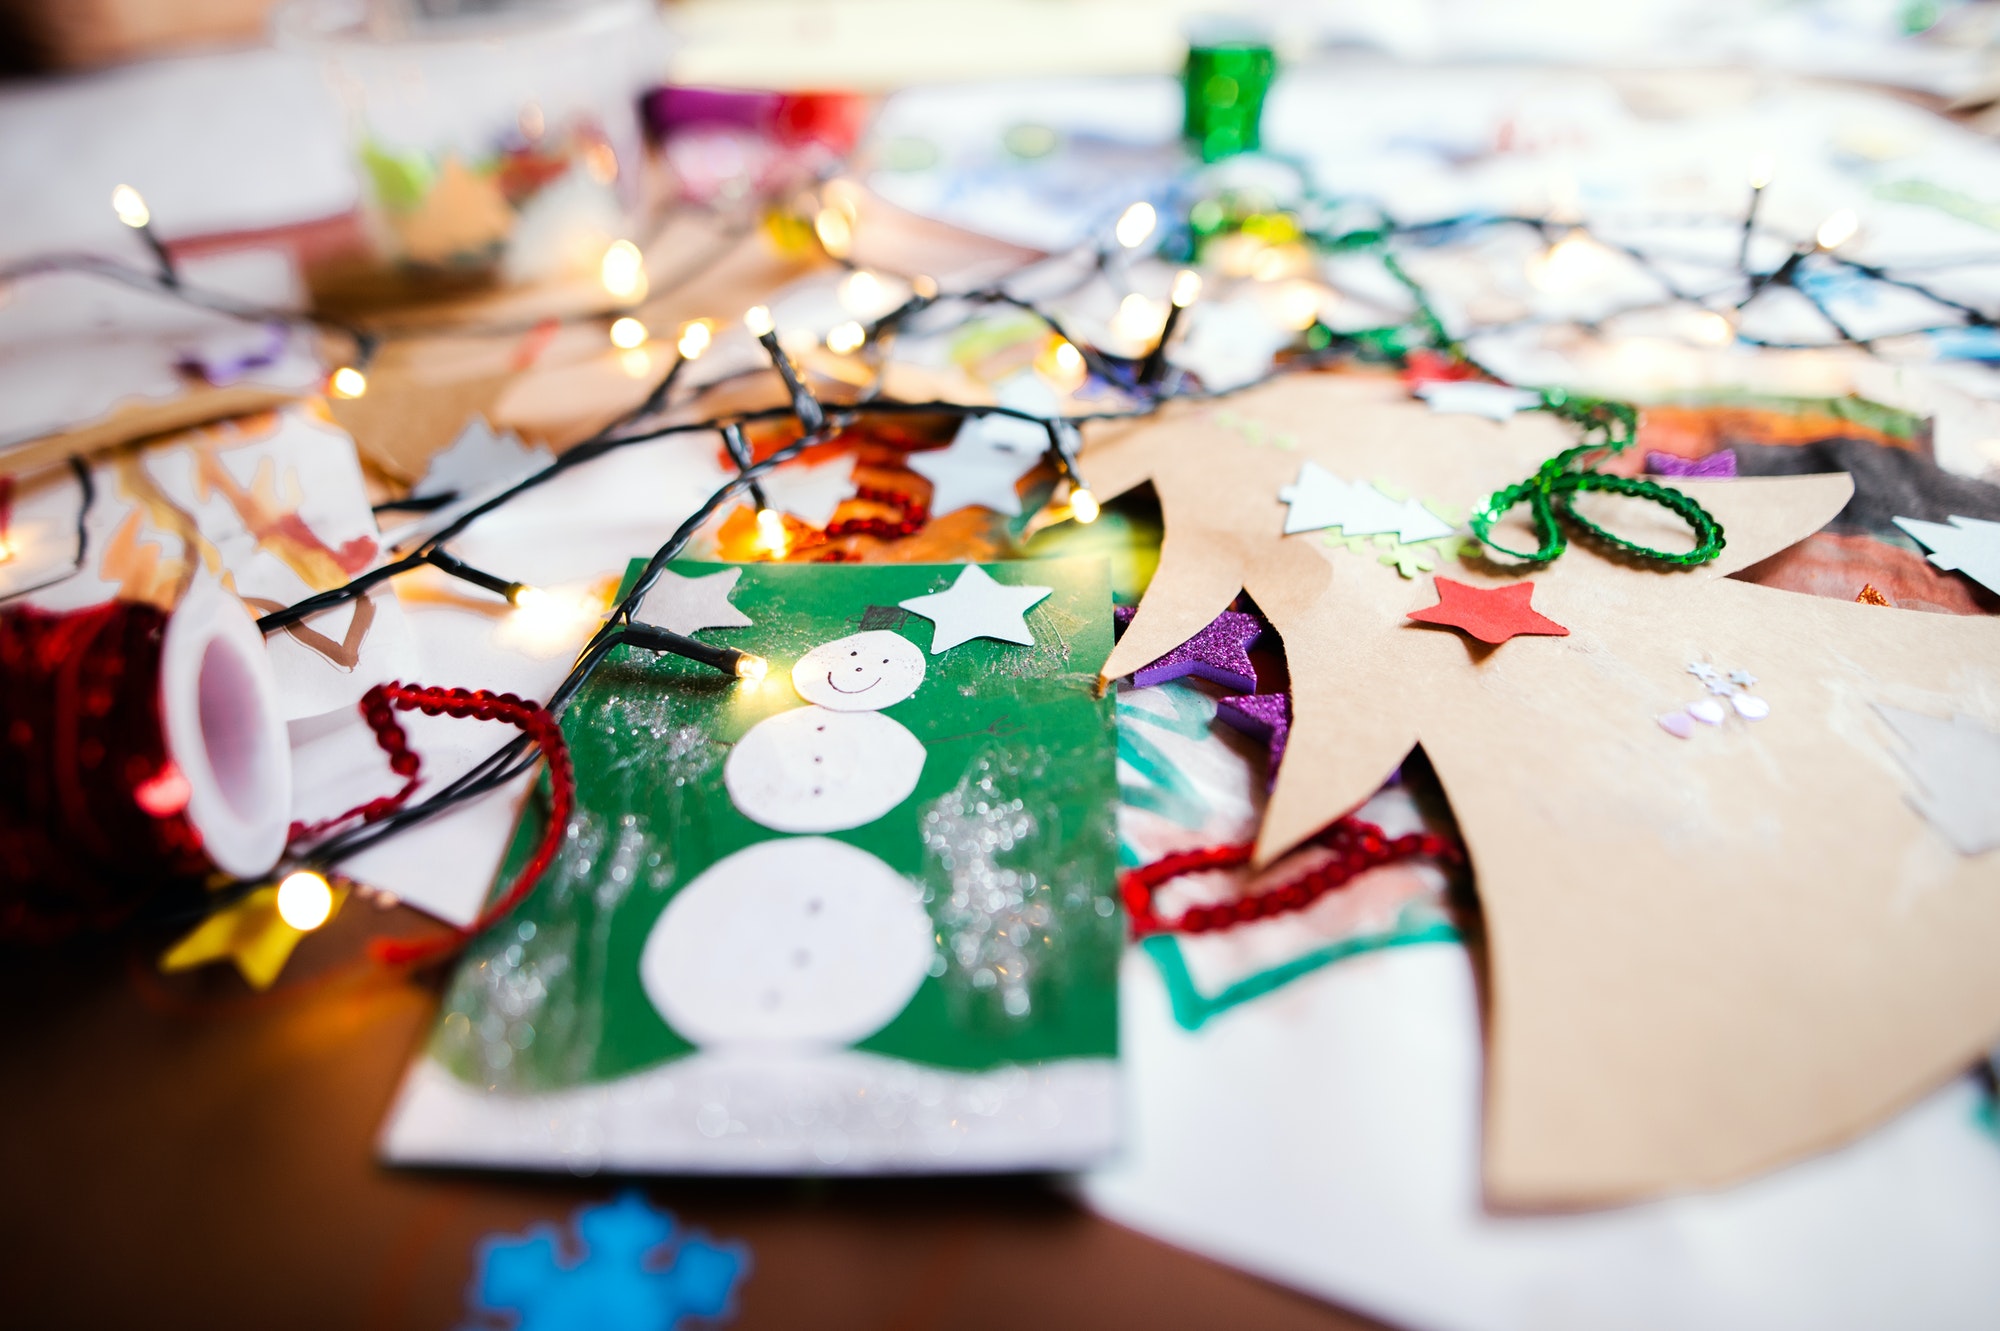 Children's paintings and Christmas paper art and craft on table